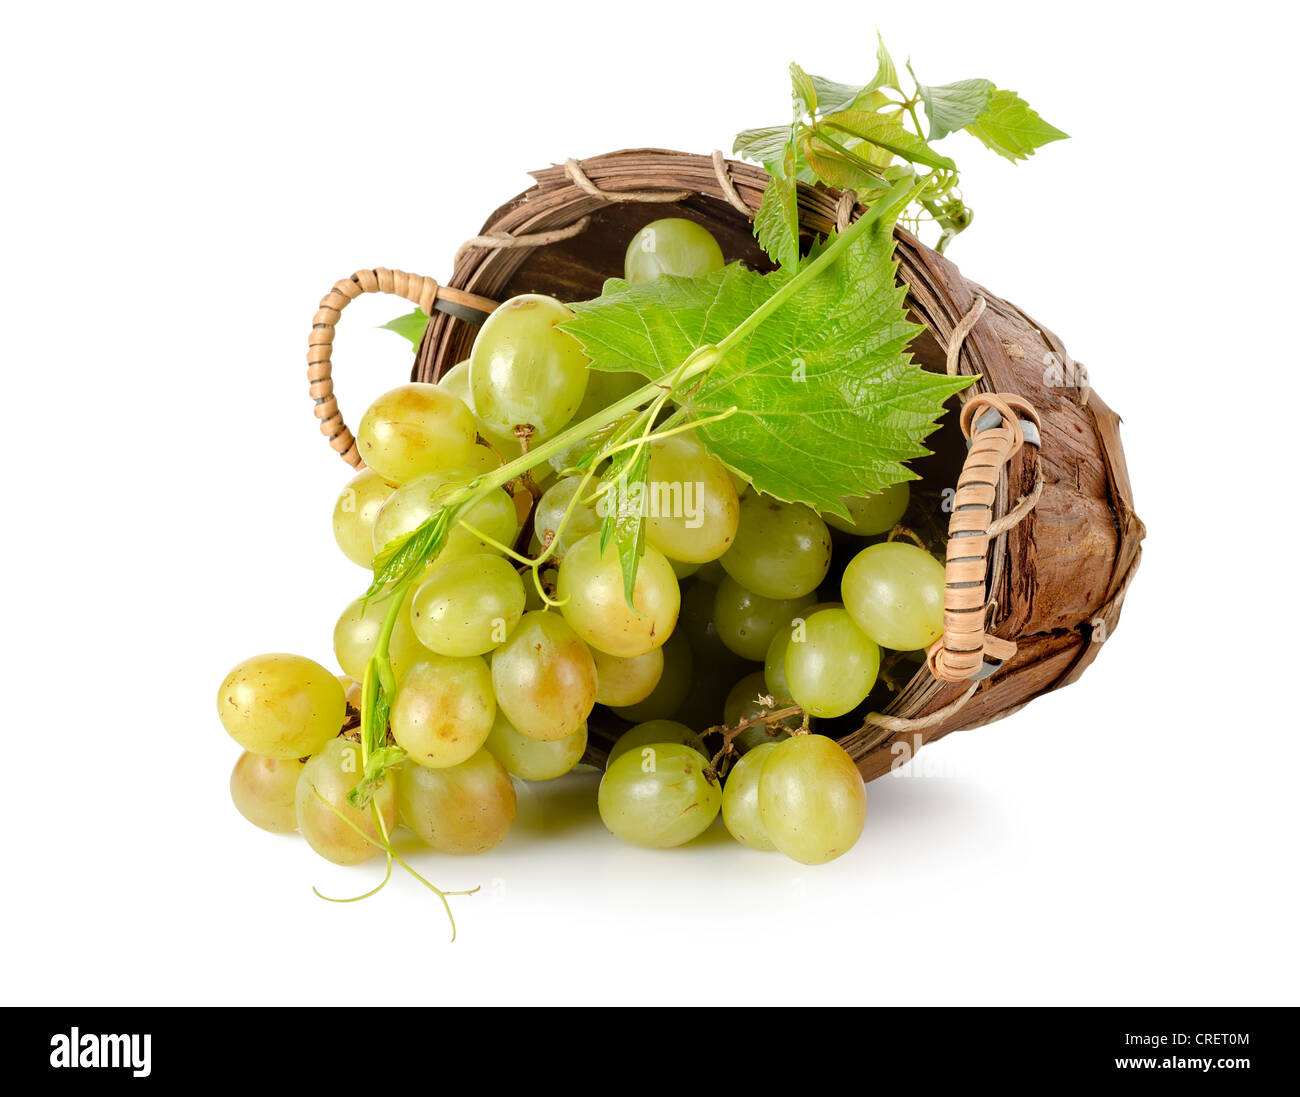 Grapes in a wooden basket isolated on white background Stock Photo